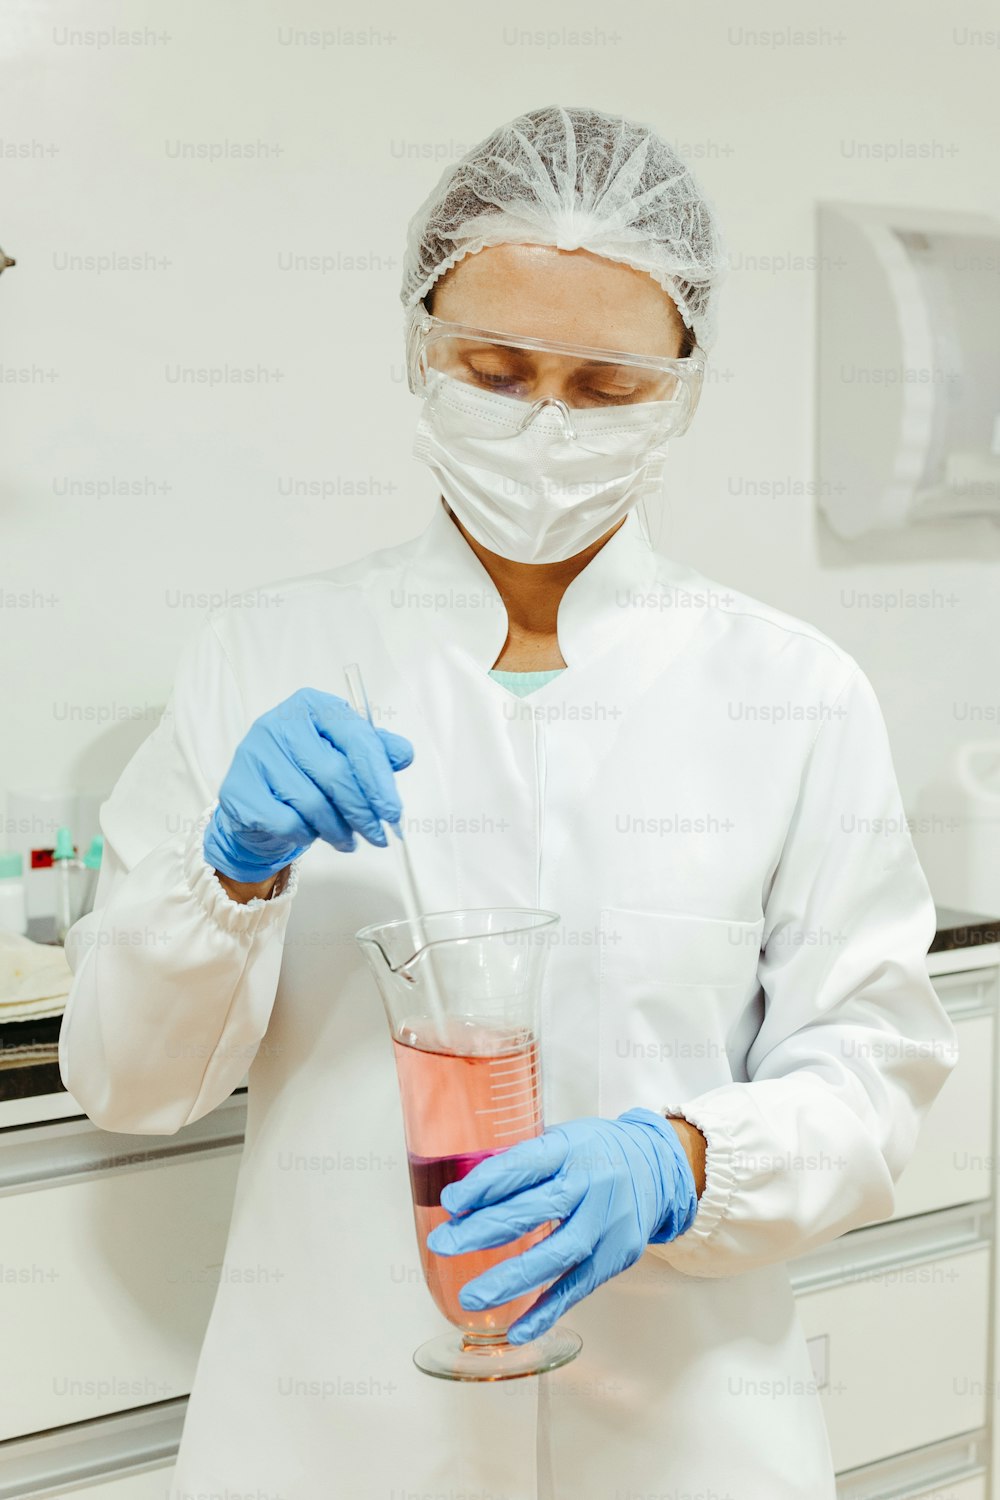 a person in a white coat and blue gloves holding a beaker